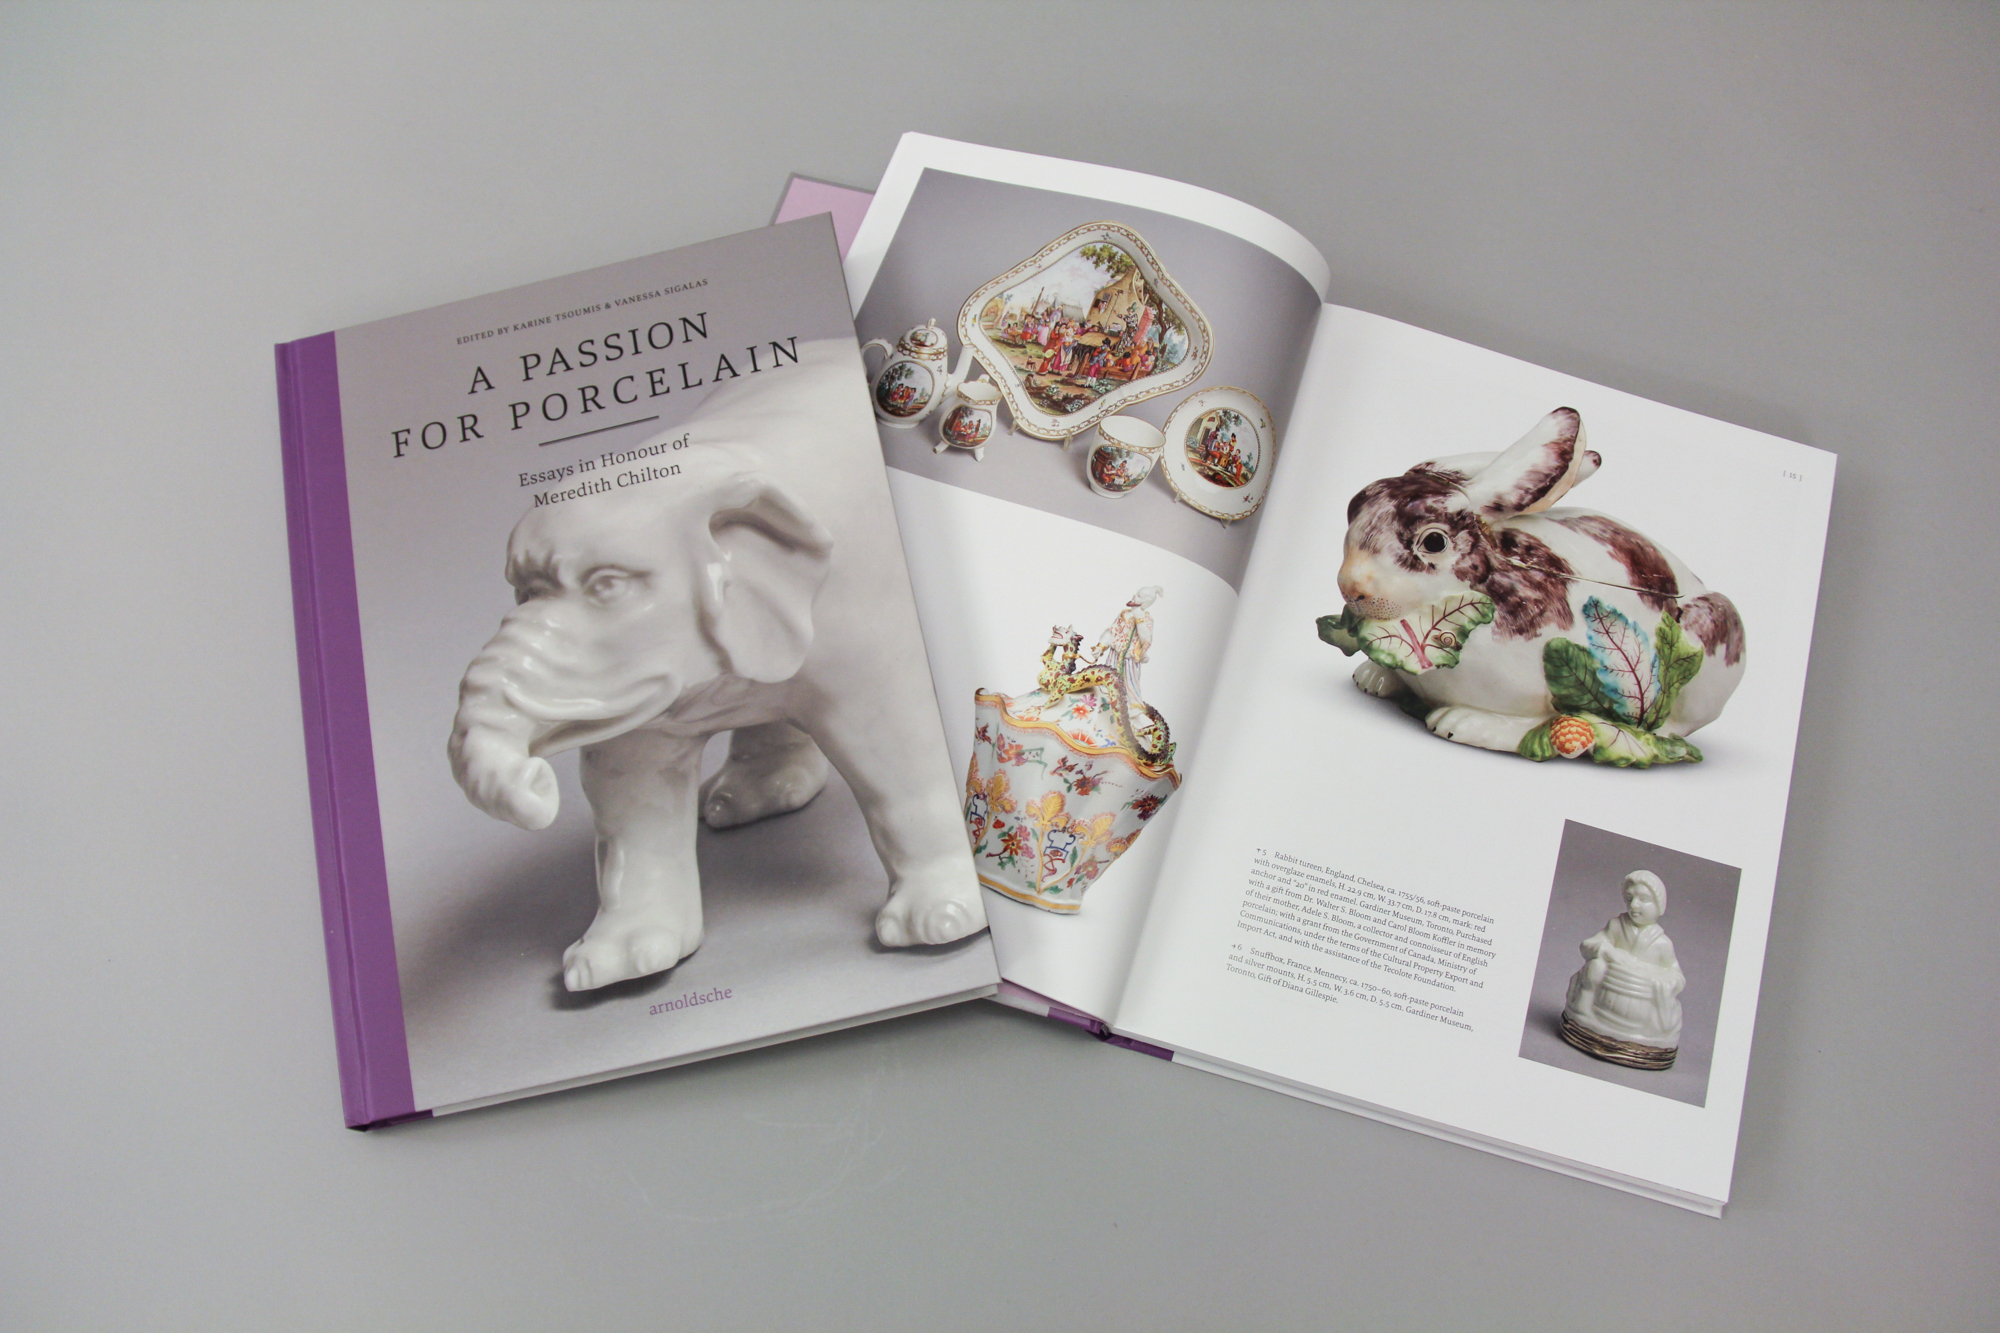 A Passion for Porcelain: Essays in Honour of Meredith Chilton Product Image 3 of 4